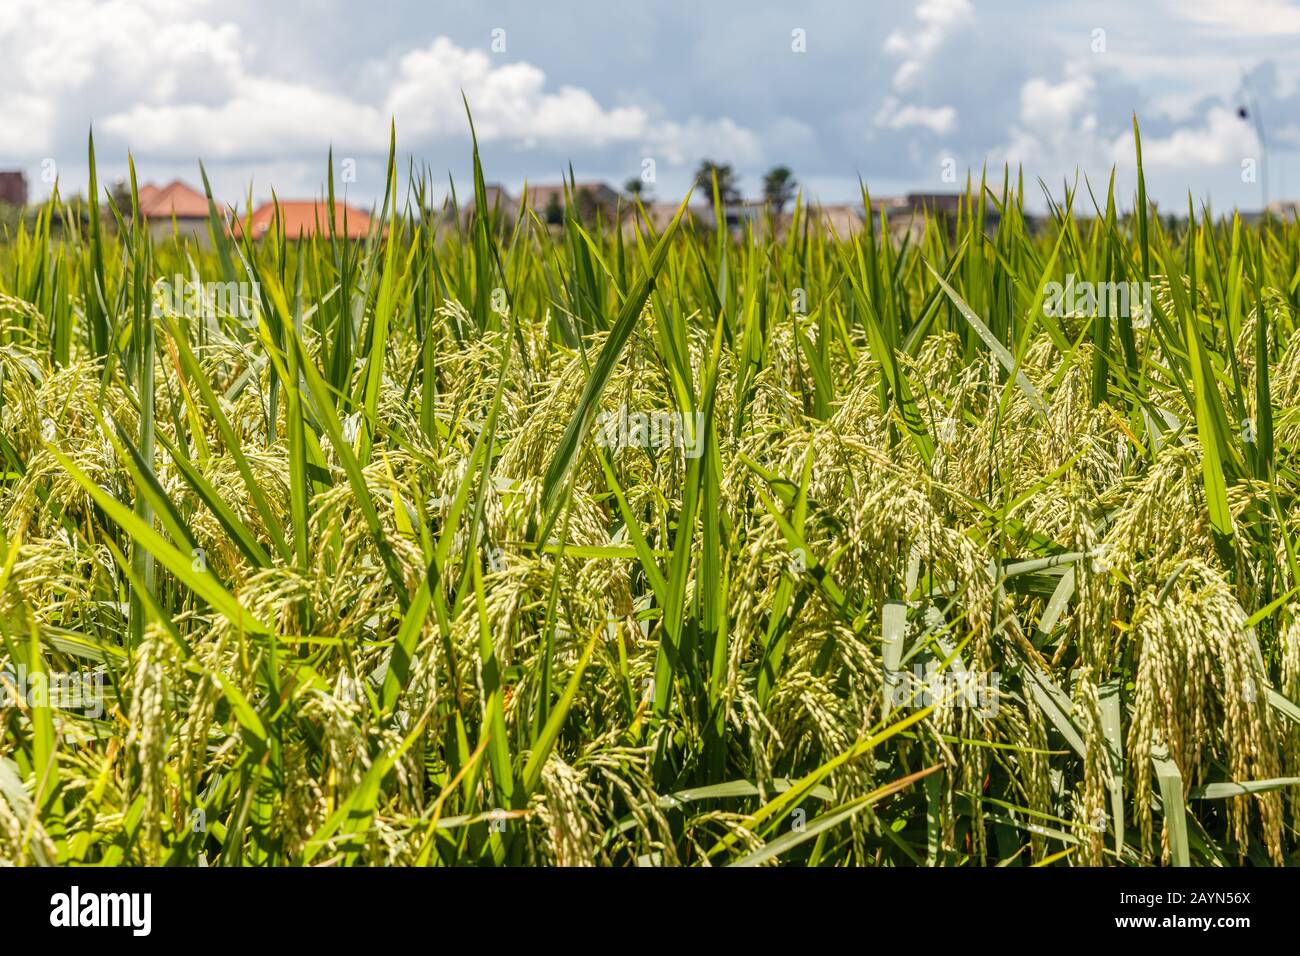 Rice field with ripe rice ready for harvesting. Bali Island, Indonesia Stock Photo